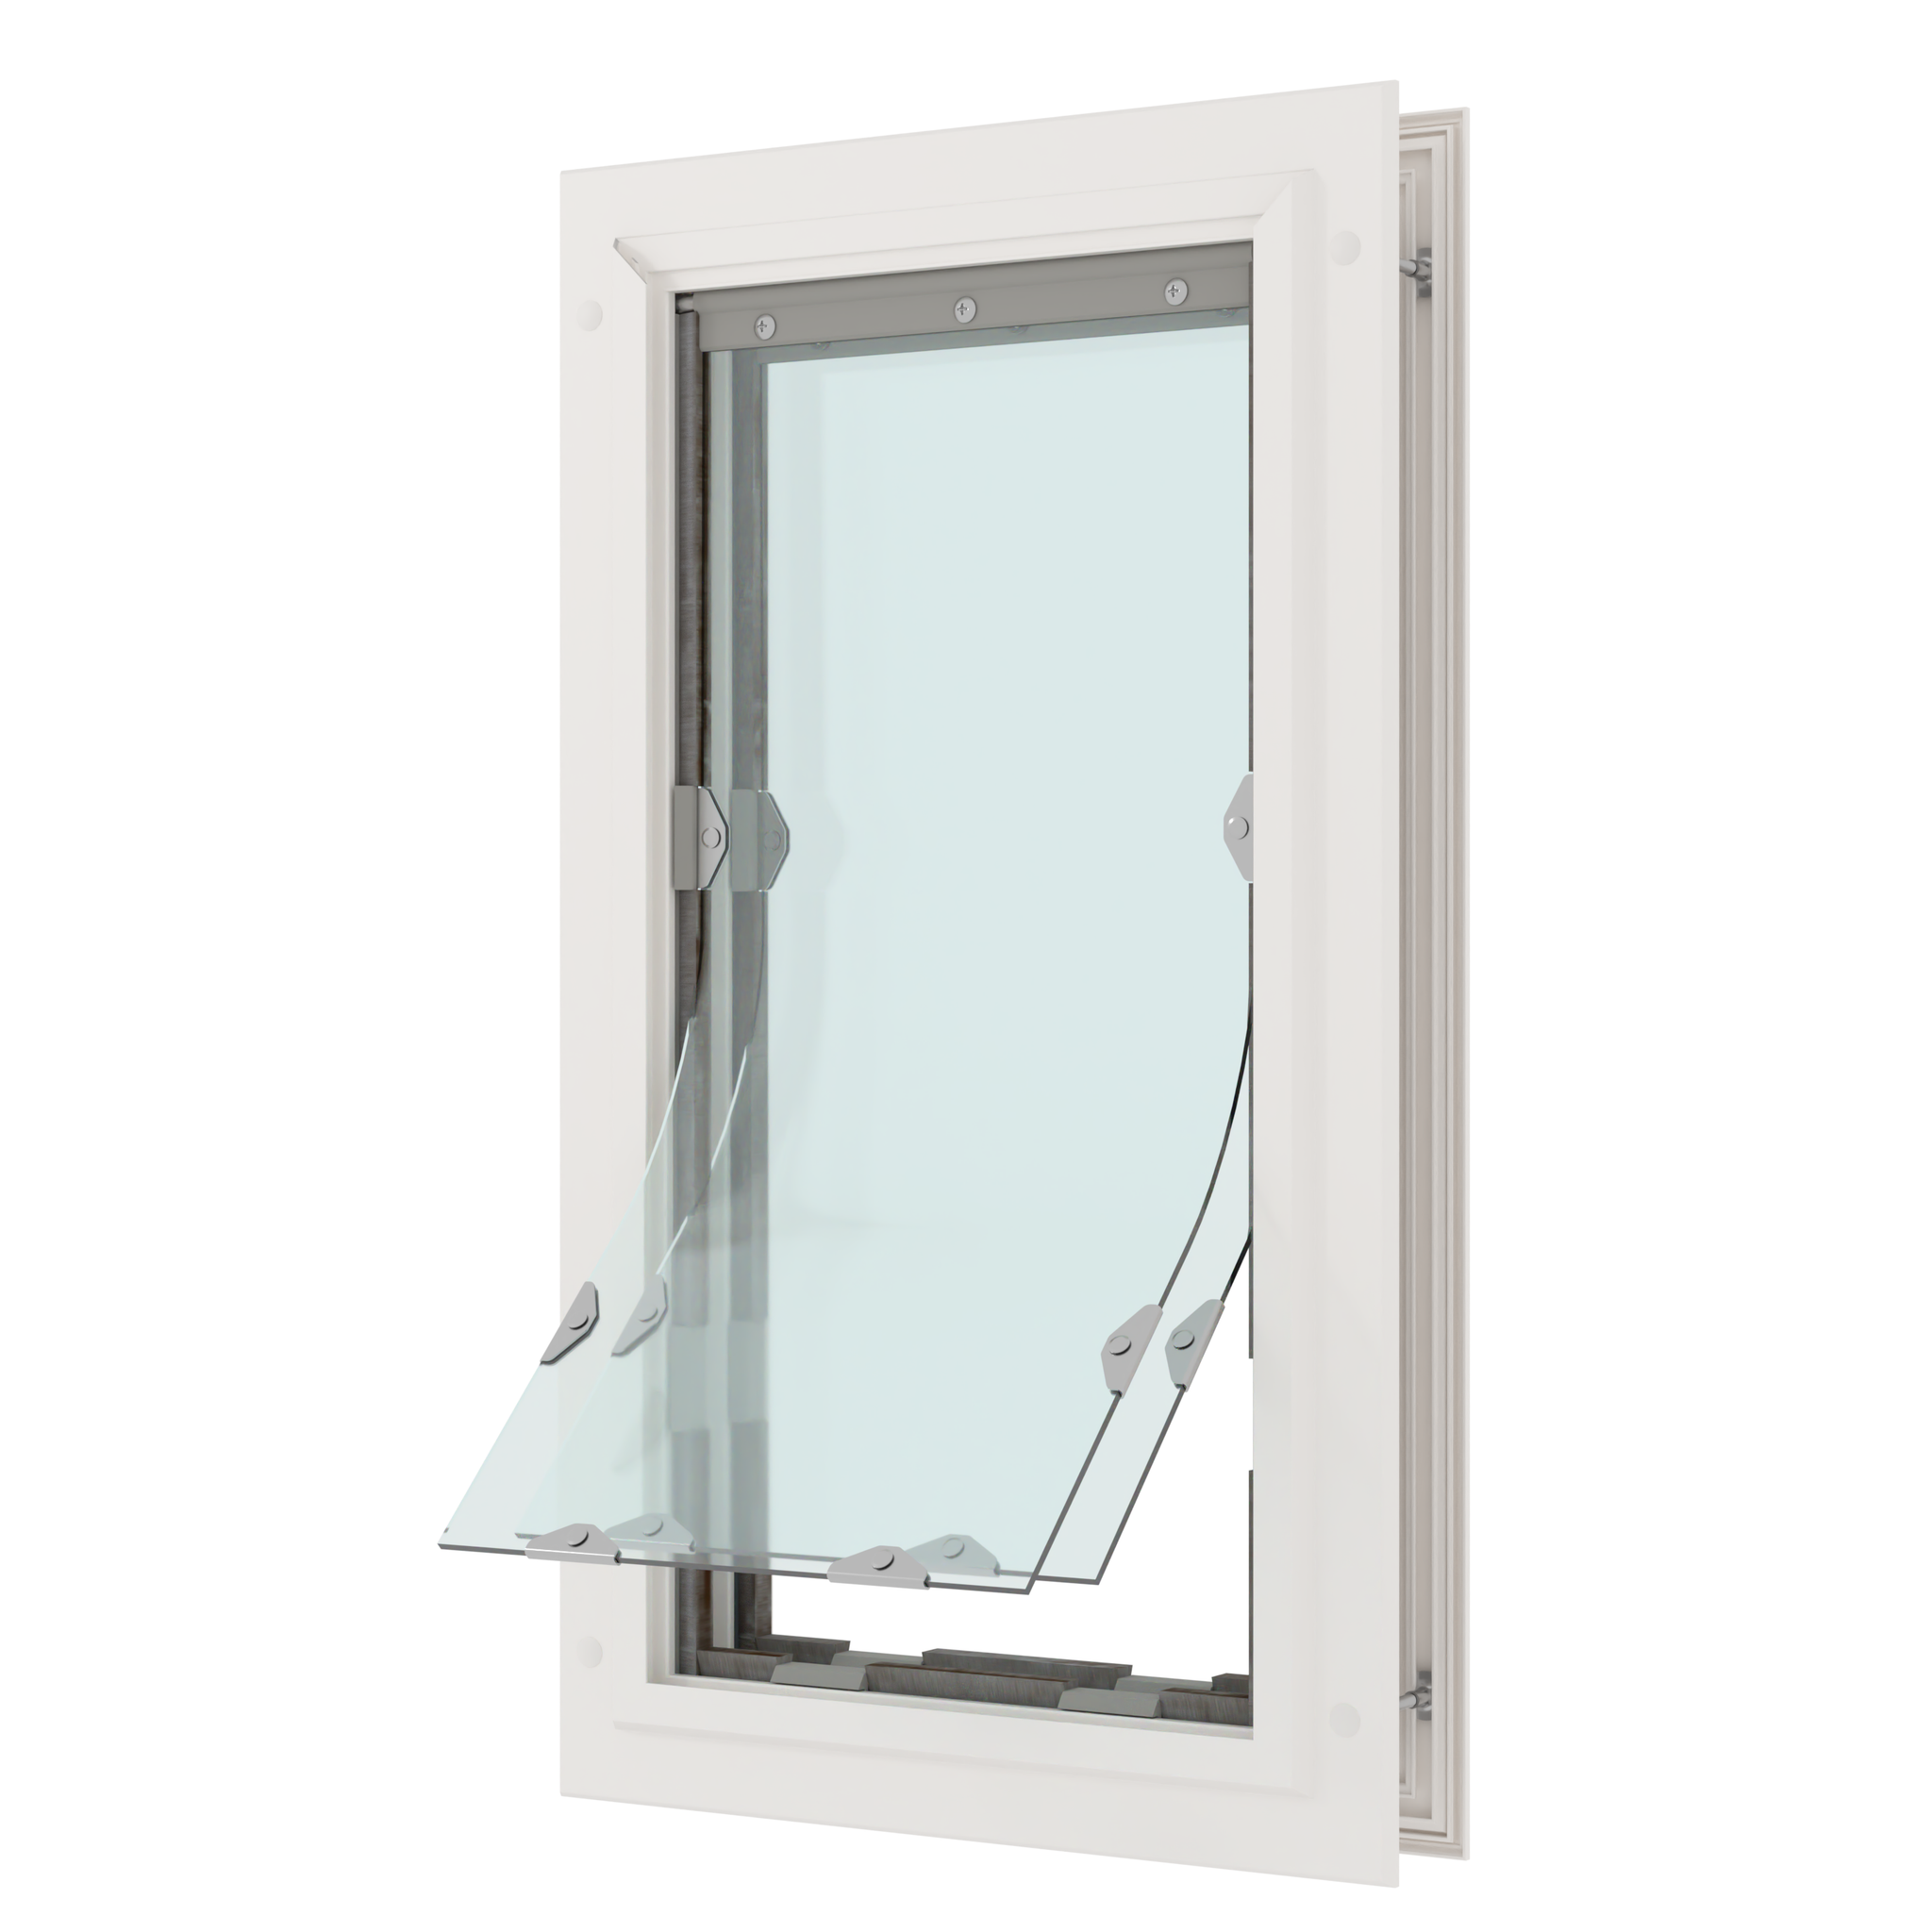 The liberty pet door for doors is one of the best pet doors with a flexible flap for those on a budget.